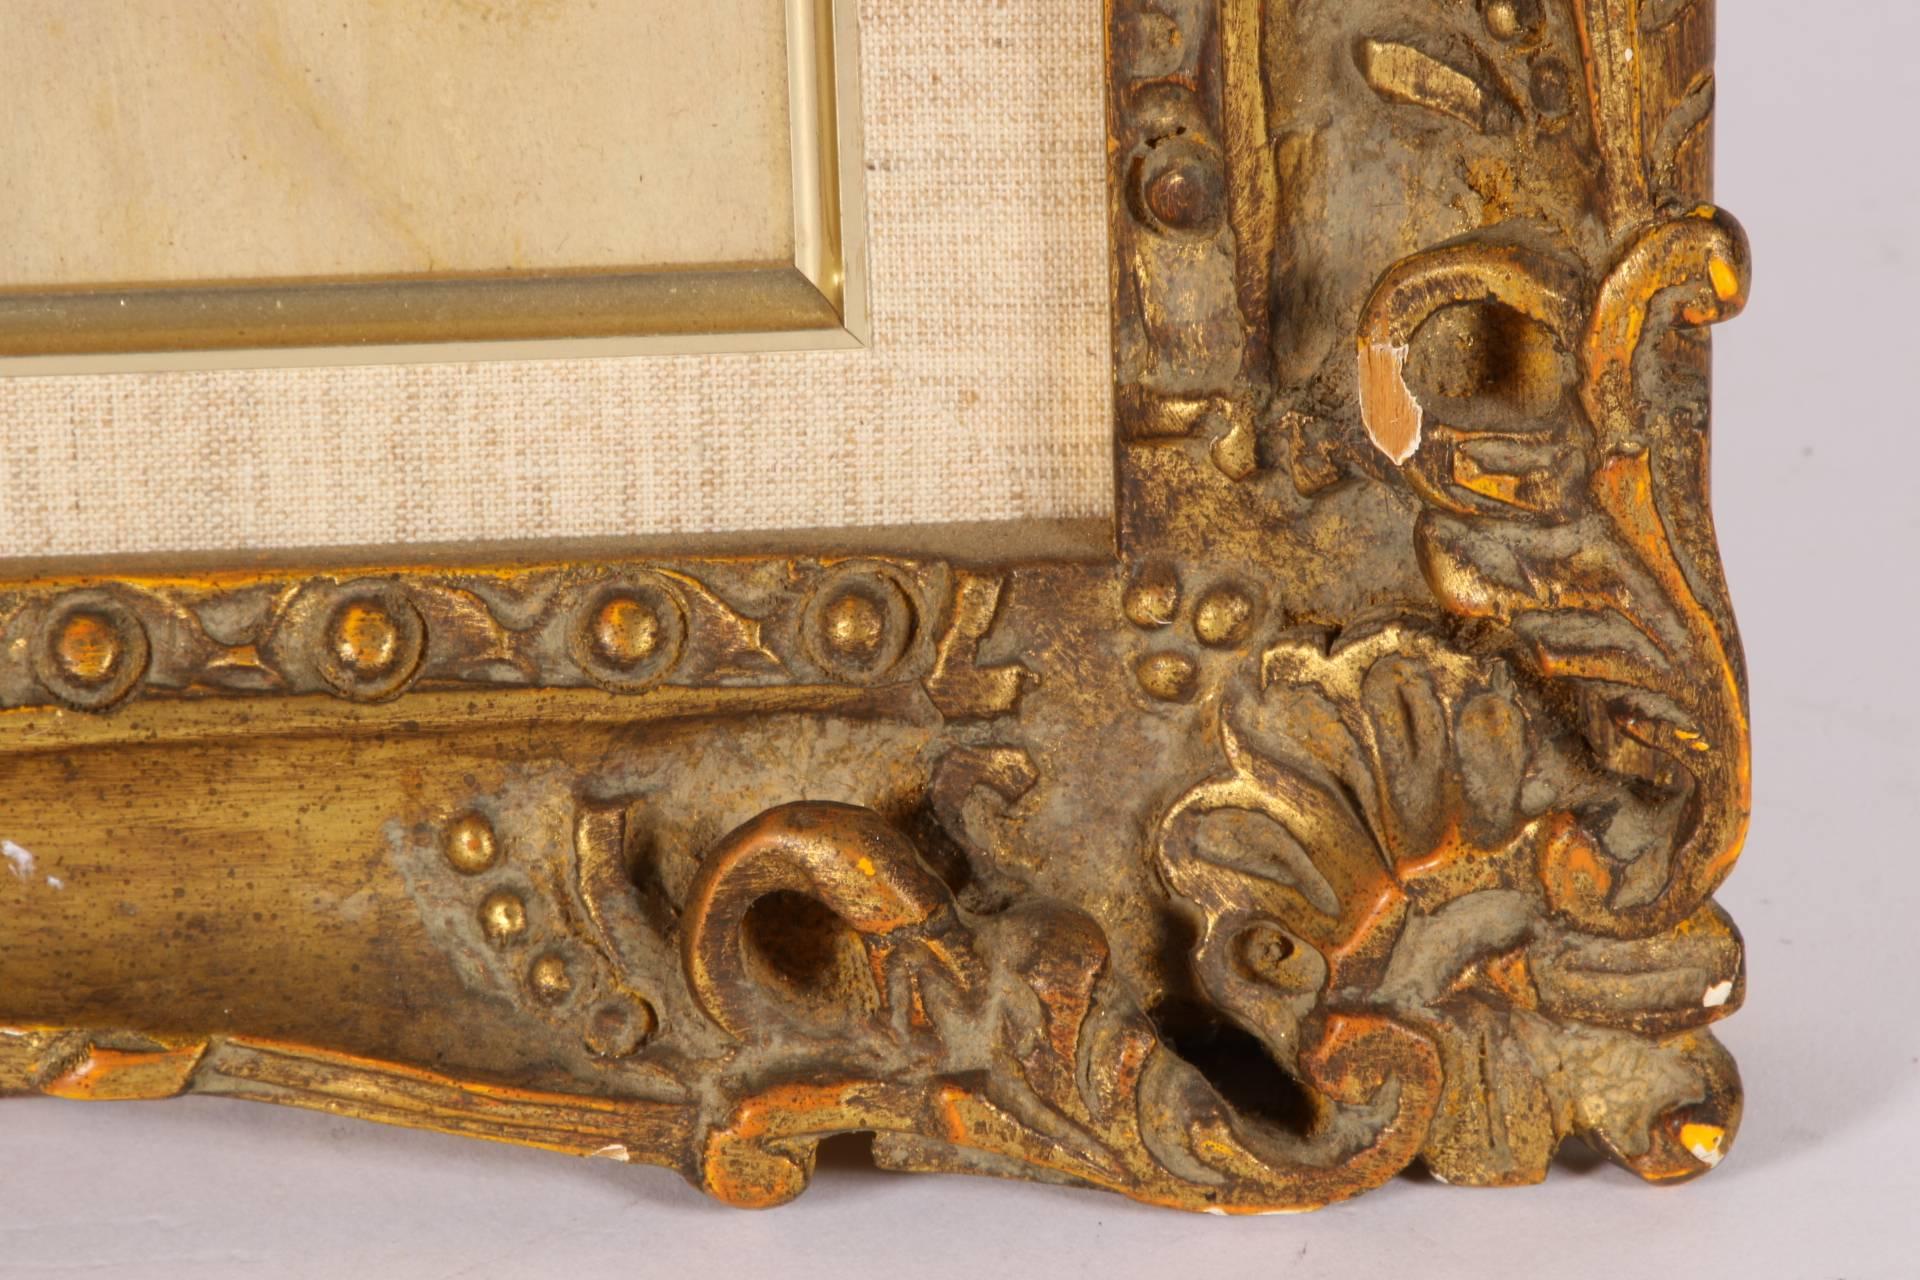 Smiling female semi-nude figure leaning on a column support. Signed lower left. Copy of the Benezit Dictionnaire entry for the artist on verso of the carved and gilt frame. 
Condition: very good with a small worn patch to the right of the torso.